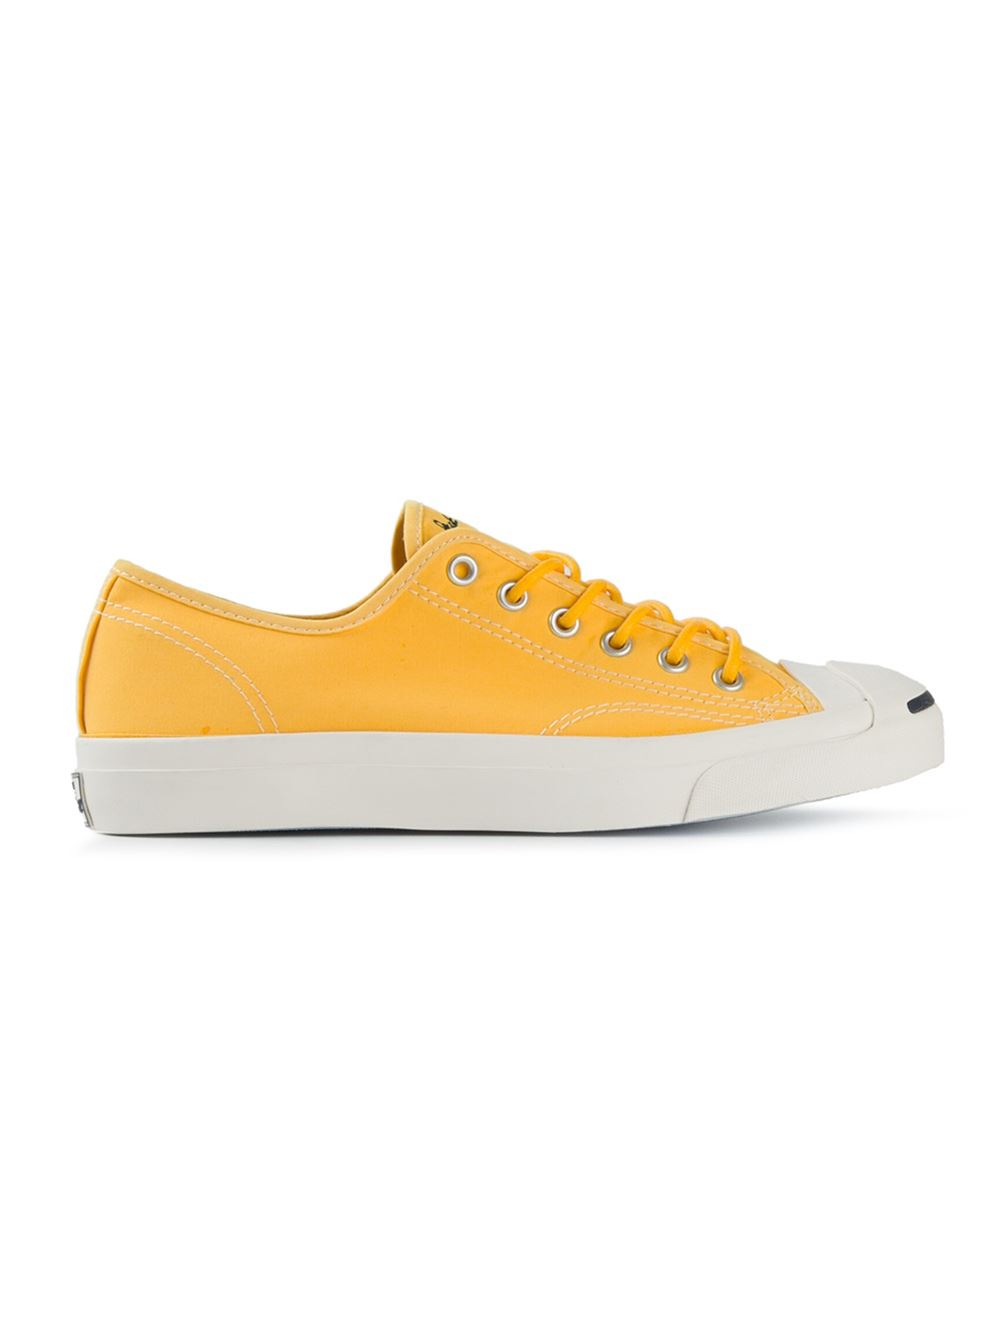 Lyst - Converse 'Jack Purcell X ' Sneakers in Yellow for Men